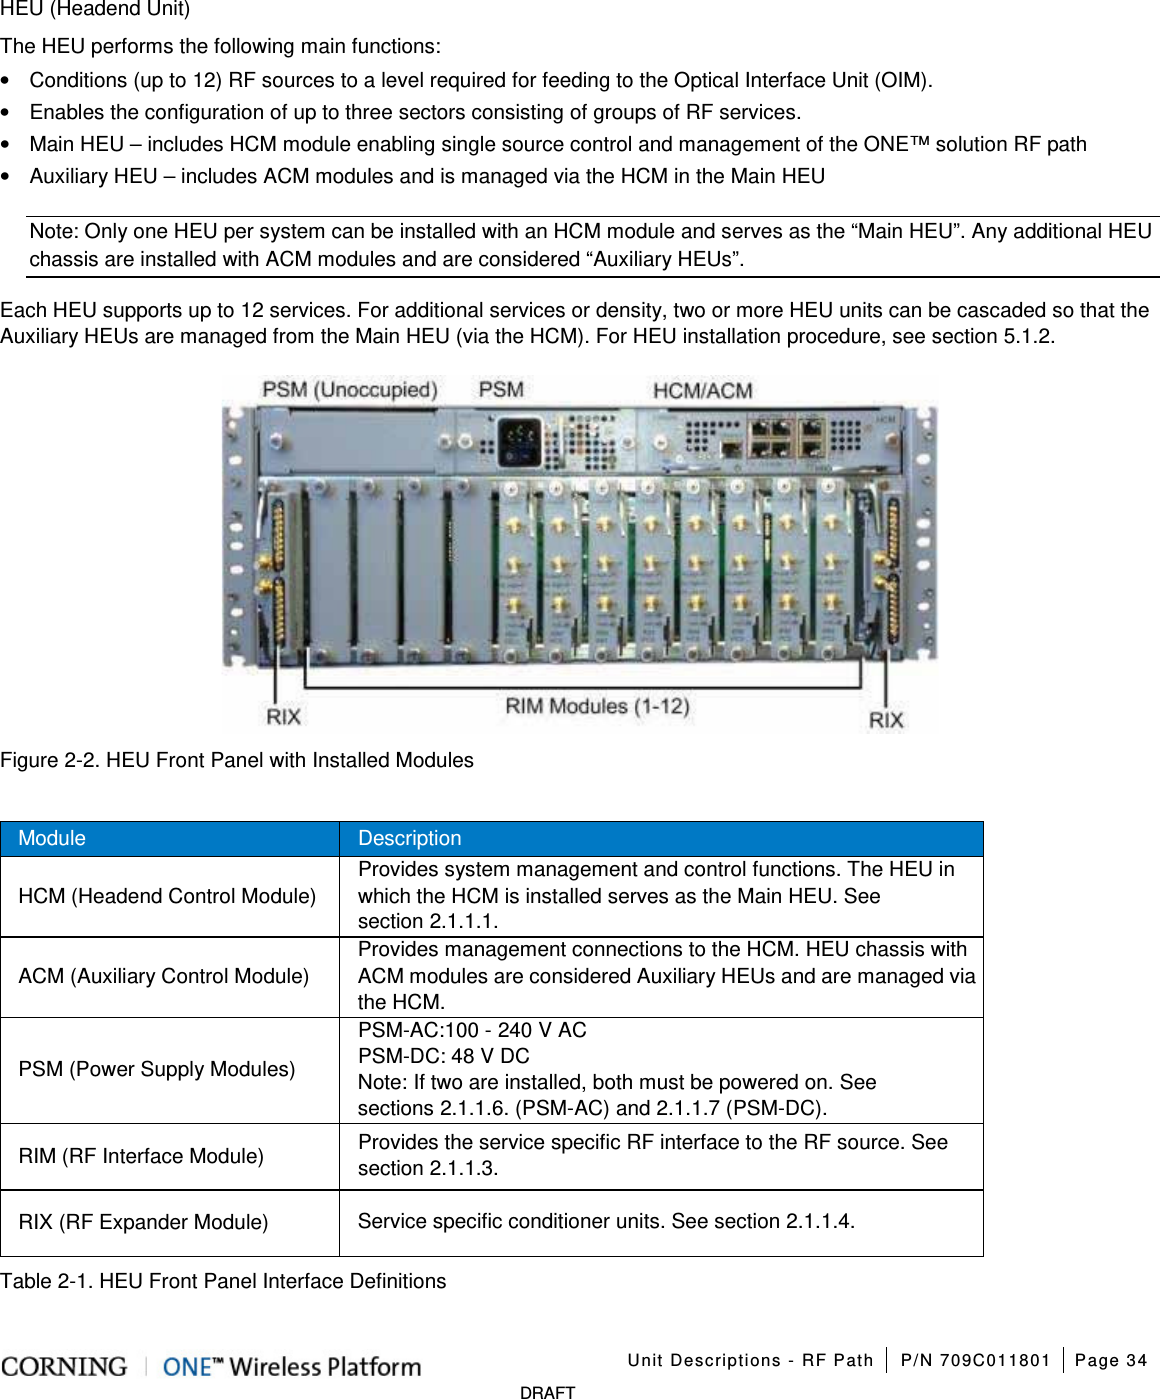    Unit Descriptions - RF Path P/N 709C011801 Page 34   DRAFT HEU (Headend Unit) The HEU performs the following main functions: • Conditions (up to 12) RF sources to a level required for feeding to the Optical Interface Unit (OIM).   • Enables the configuration of up to three sectors consisting of groups of RF services. • Main HEU – includes HCM module enabling single source control and management of the ONE™ solution RF path   • Auxiliary HEU – includes ACM modules and is managed via the HCM in the Main HEU Note: Only one HEU per system can be installed with an HCM module and serves as the “Main HEU”. Any additional HEU chassis are installed with ACM modules and are considered “Auxiliary HEUs”. Each HEU supports up to 12 services. For additional services or density, two or more HEU units can be cascaded so that the Auxiliary HEUs are managed from the Main HEU (via the HCM). For HEU installation procedure, see section  5.1.2.  Figure  2-2. HEU Front Panel with Installed Modules  Module Description HCM (Headend Control Module)   Provides system management and control functions. The HEU in which the HCM is installed serves as the Main HEU. See section  2.1.1.1. ACM (Auxiliary Control Module) Provides management connections to the HCM. HEU chassis with ACM modules are considered Auxiliary HEUs and are managed via the HCM. PSM (Power Supply Modules) PSM-AC:100 - 240 V AC   PSM-DC: 48 V DC Note: If two are installed, both must be powered on. See sections  2.1.1.6. (PSM-AC) and  2.1.1.7 (PSM-DC). RIM (RF Interface Module) Provides the service specific RF interface to the RF source. See section  2.1.1.3. RIX (RF Expander Module)   Service specific conditioner units. See section  2.1.1.4. Table  2-1. HEU Front Panel Interface Definitions  